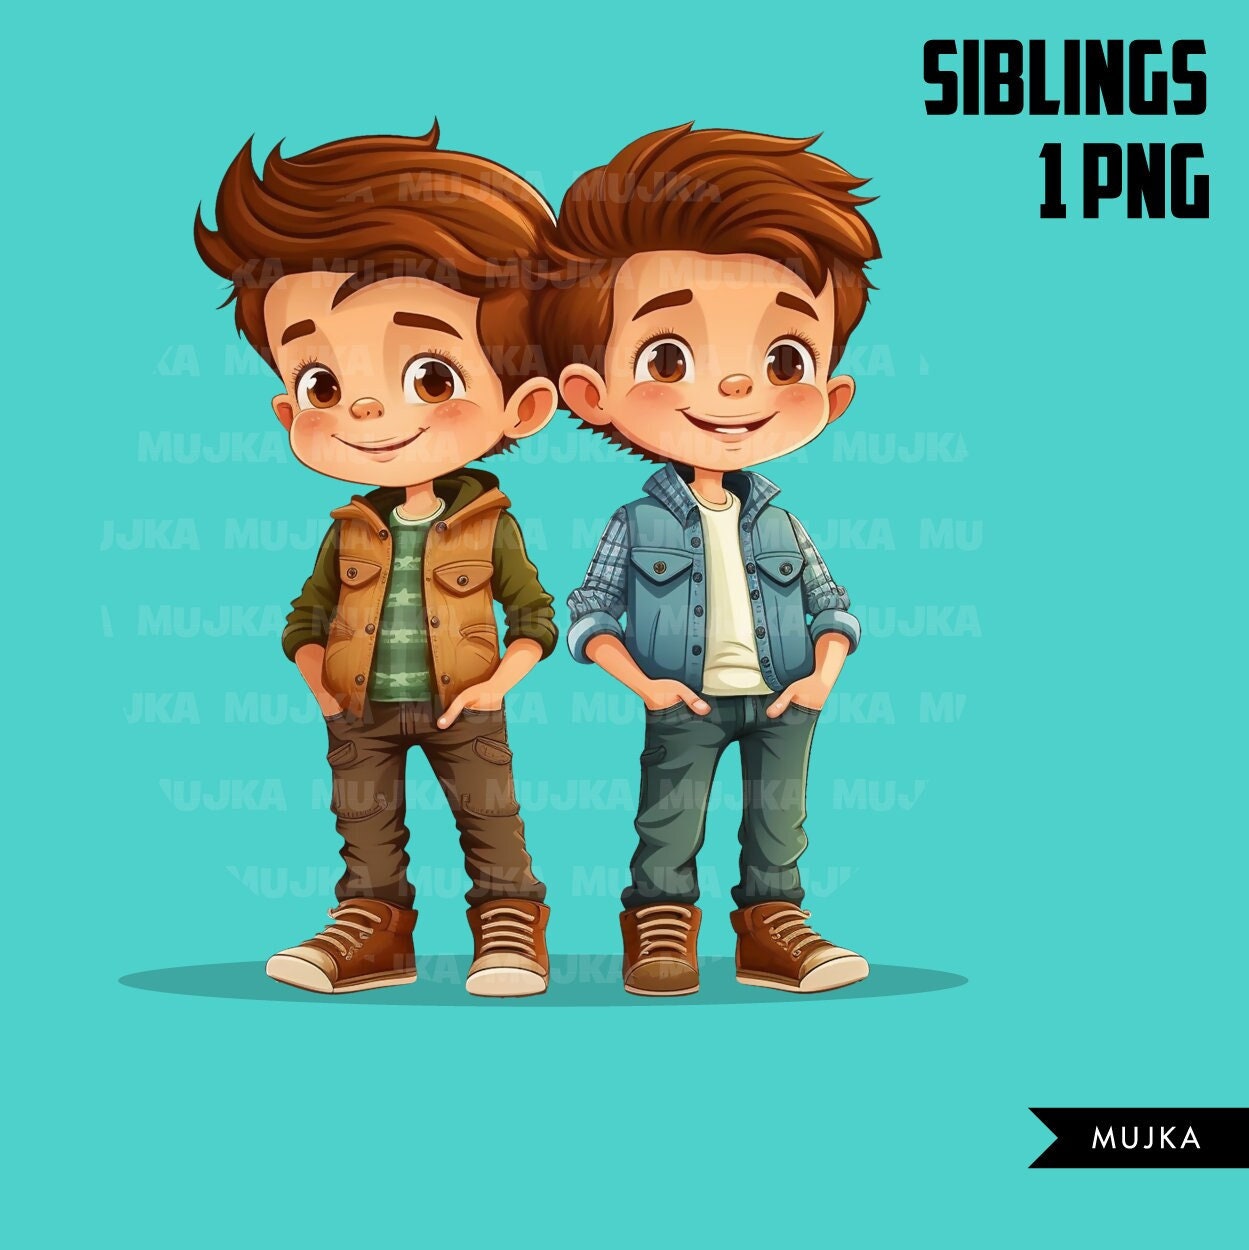 Siblings art, brothers png, friends png, family png, twin Boys clipart –  MUJKA CLIPARTS